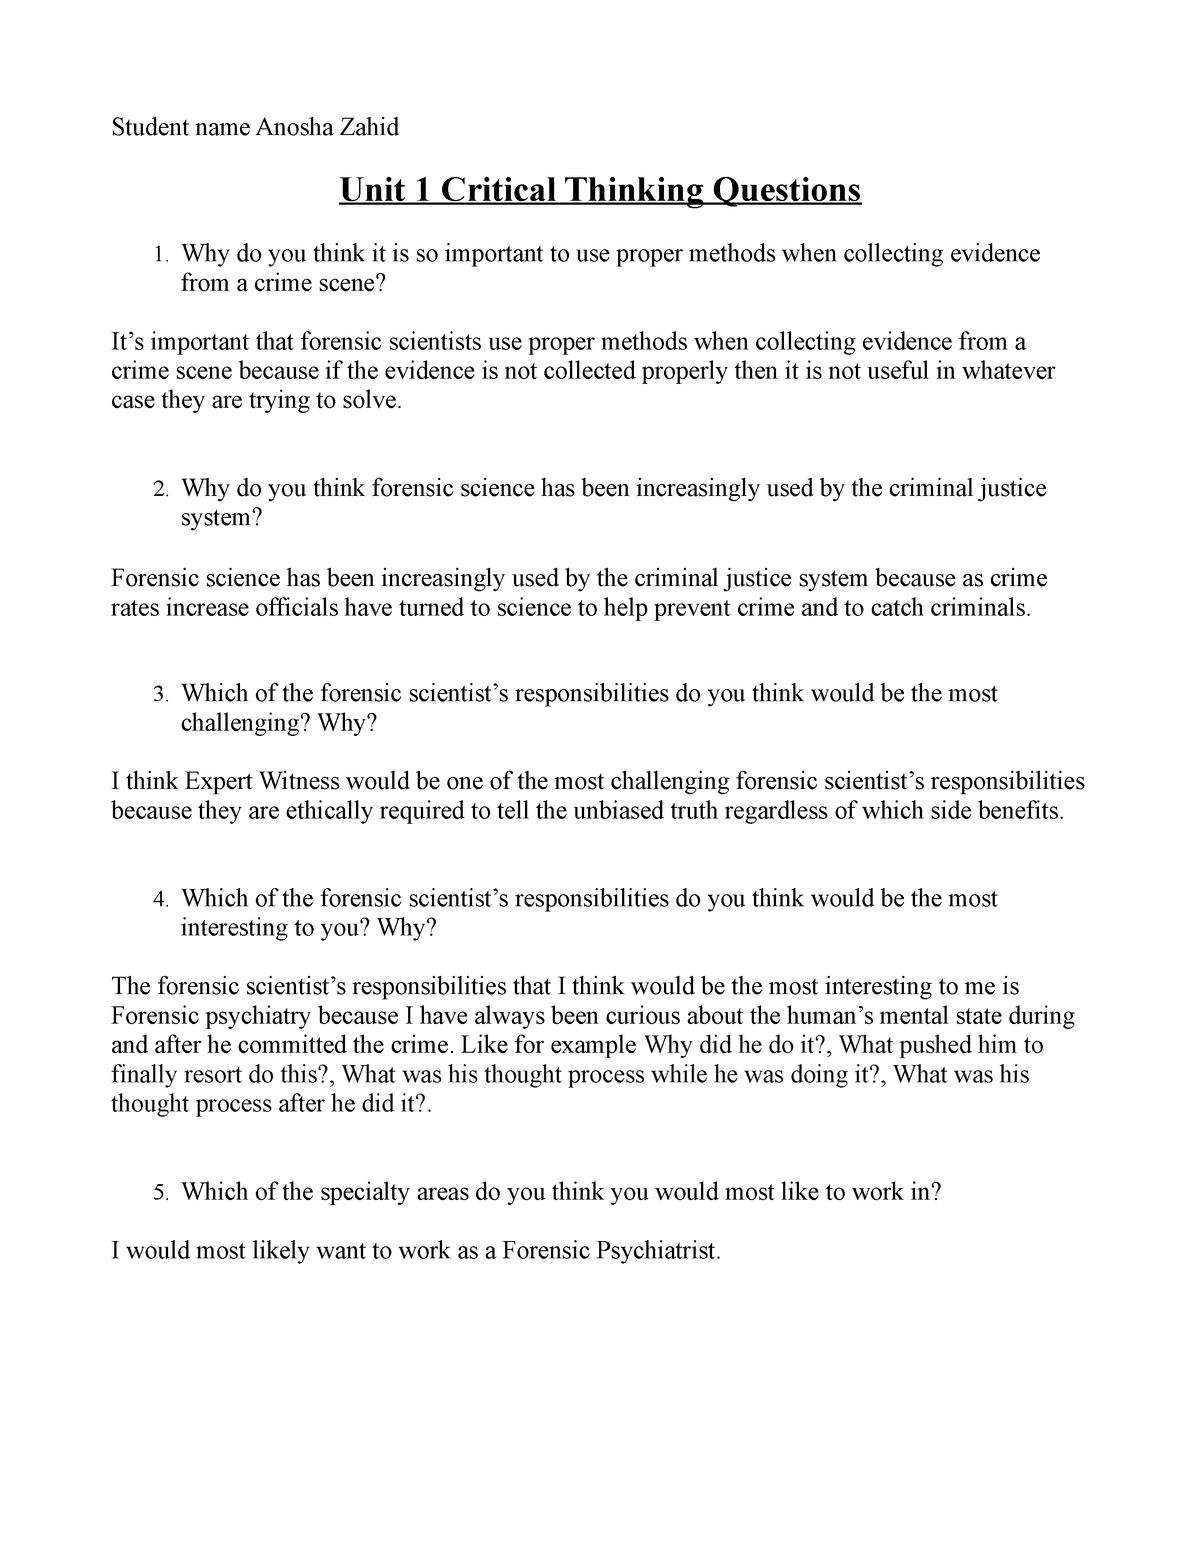 unit 1 critical thinking questions forensic science